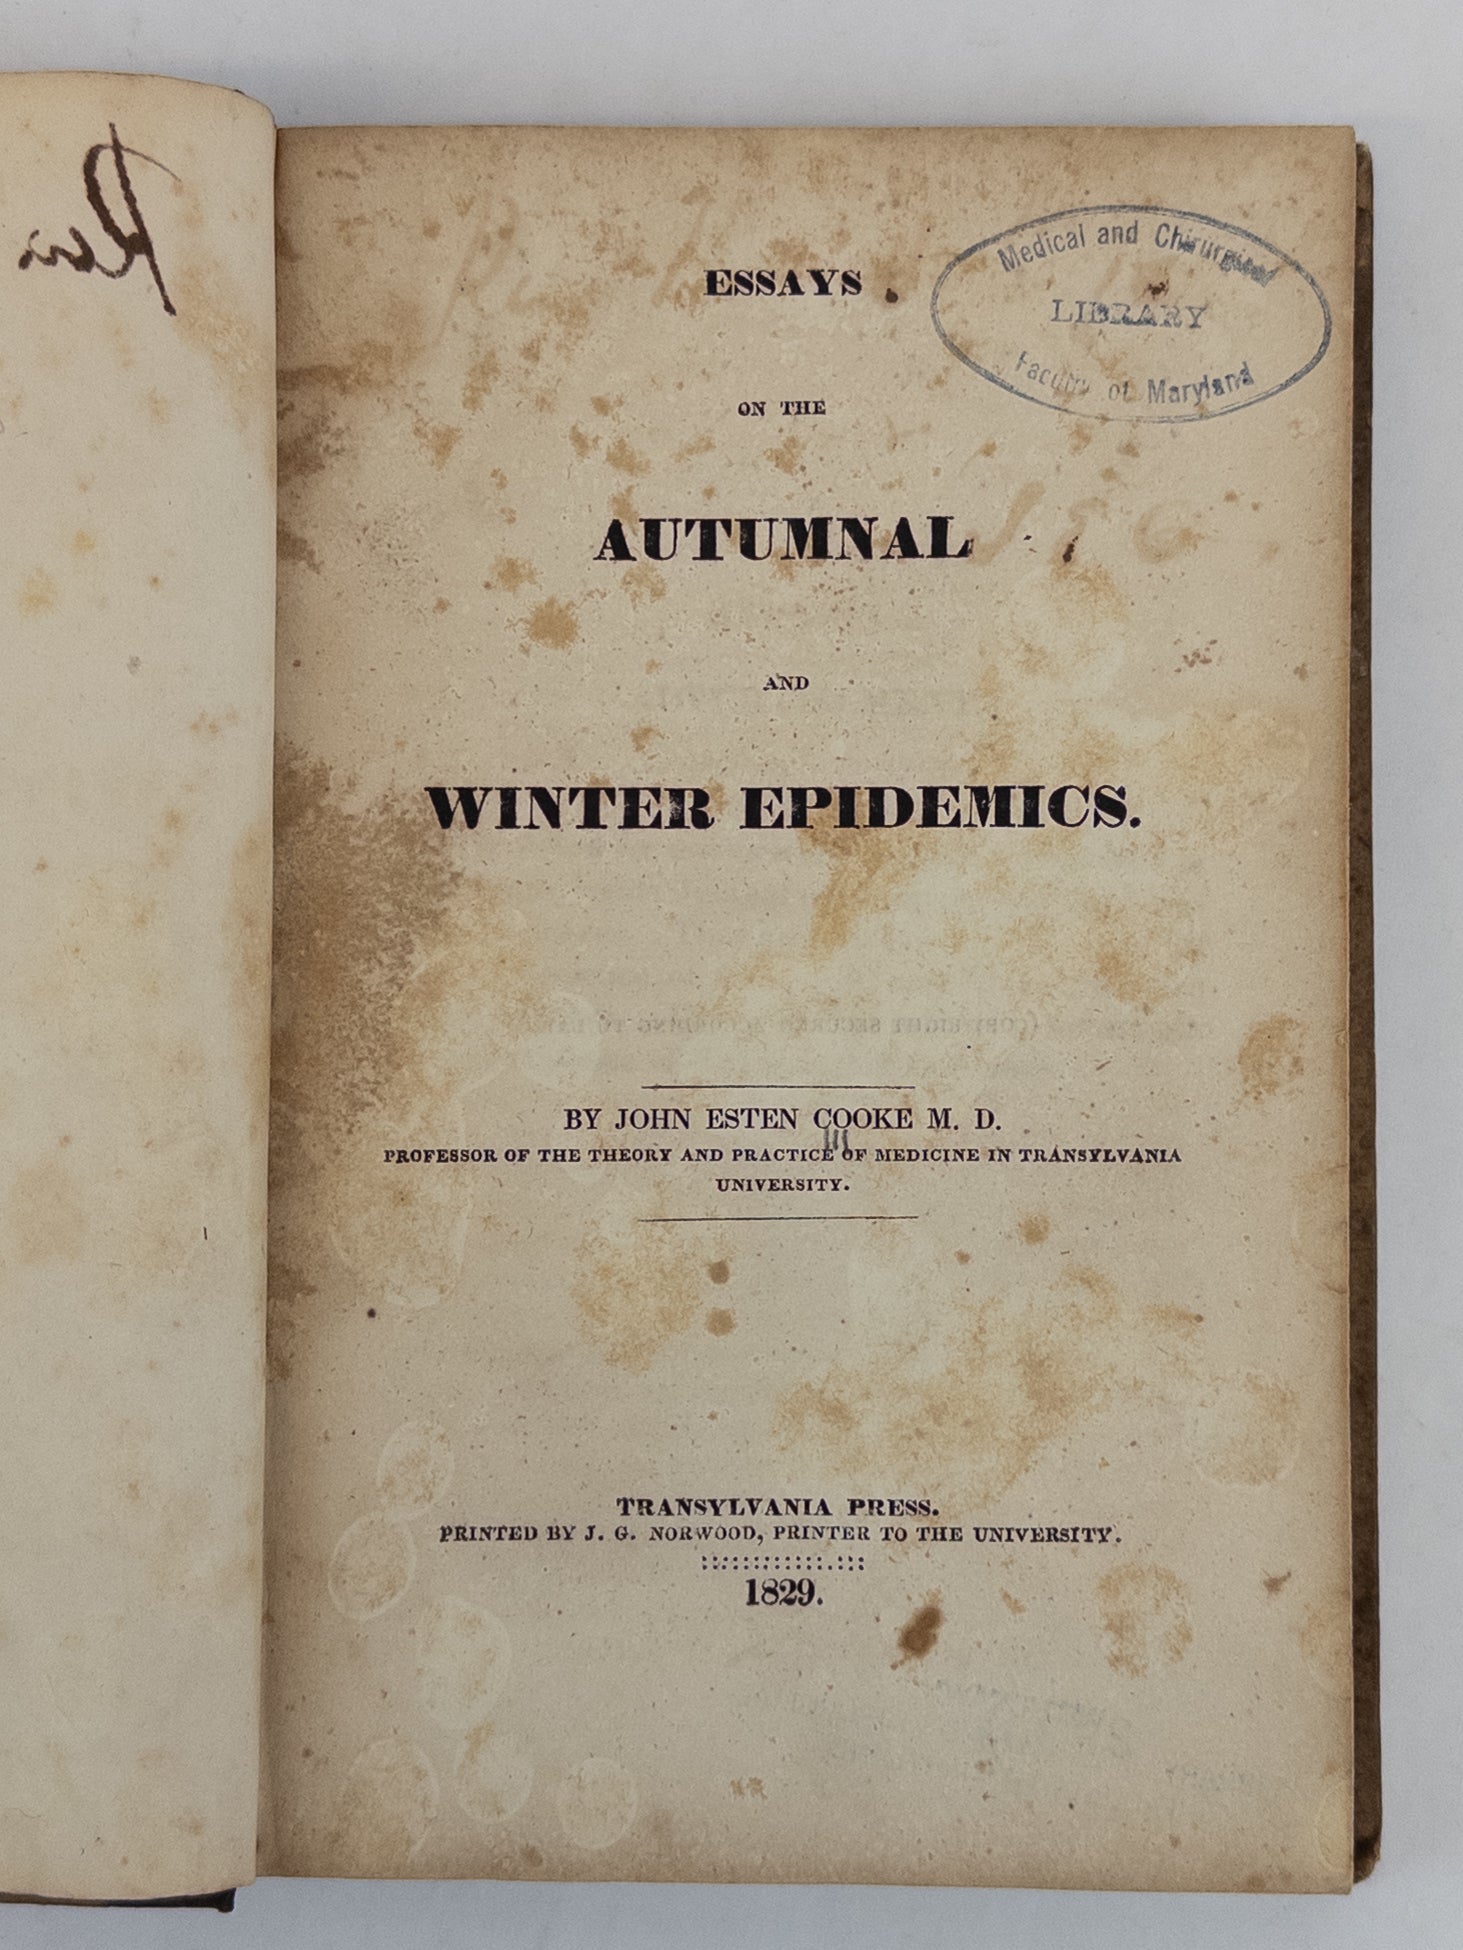 Product Image for ESSAYS ON THE AUTUMNAL AND WINTER EPIDEMICS [Bound with] REMARKS ON THE CHOLERA IN LEXINGTON, IN JUNE AND JULY, 1833 [Bound with] AN INTRODUCTORY LECTURE, DELIVERED TO THE MEDICA CLASS OF TRANSYLVANIA UNIVERSITY [Bound with] REMARKS ON SOME OF THE DISEASE